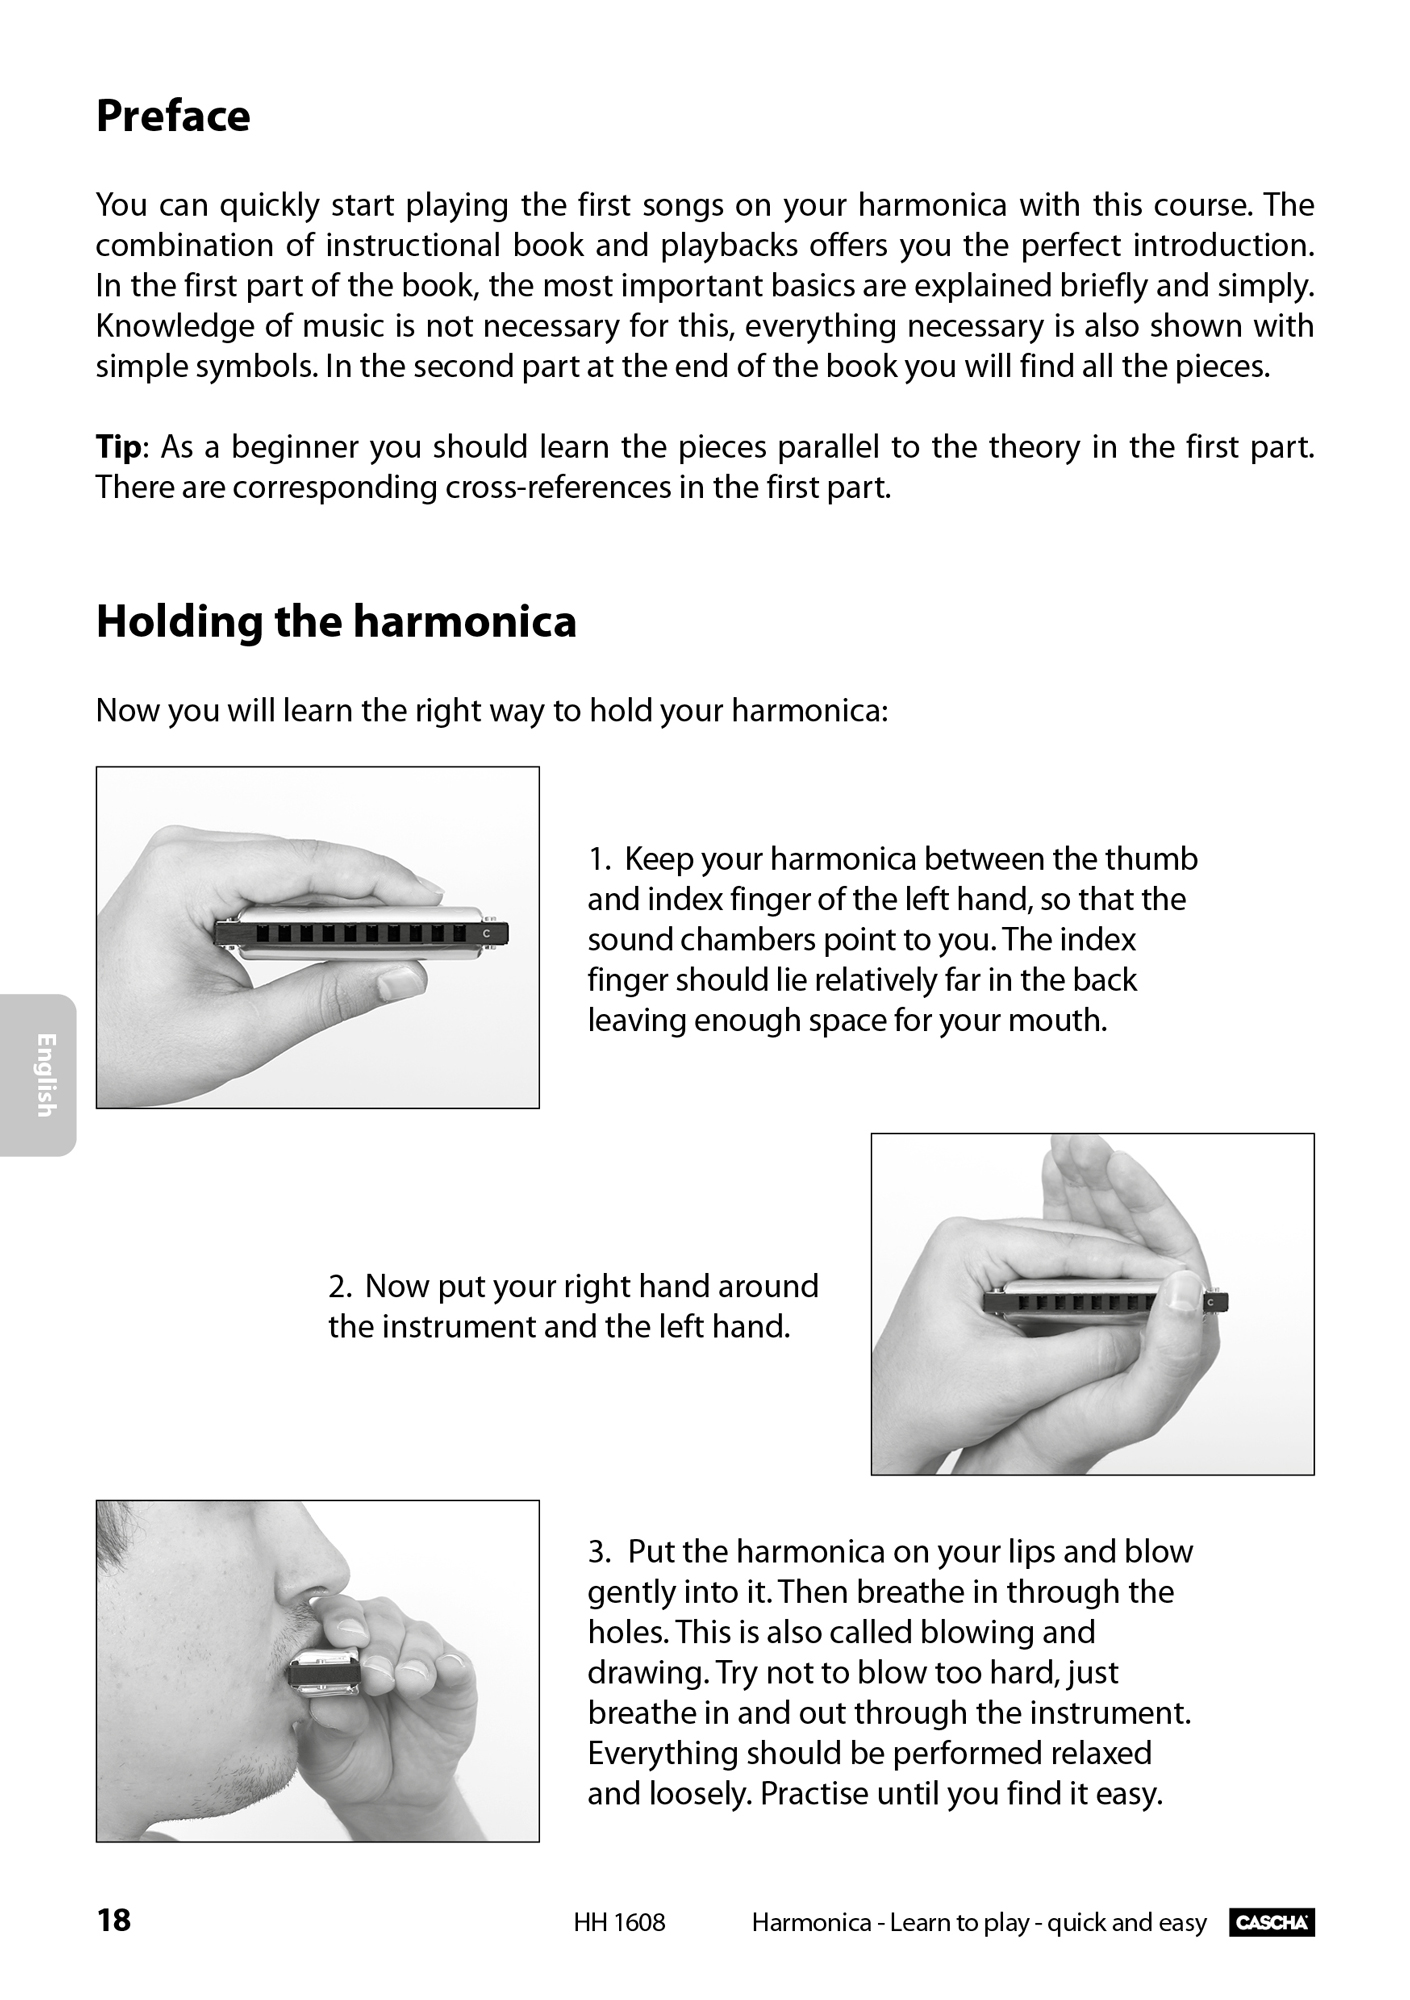 Harmonica - Learn to play quick and easy, 4 languages Product Photos 4